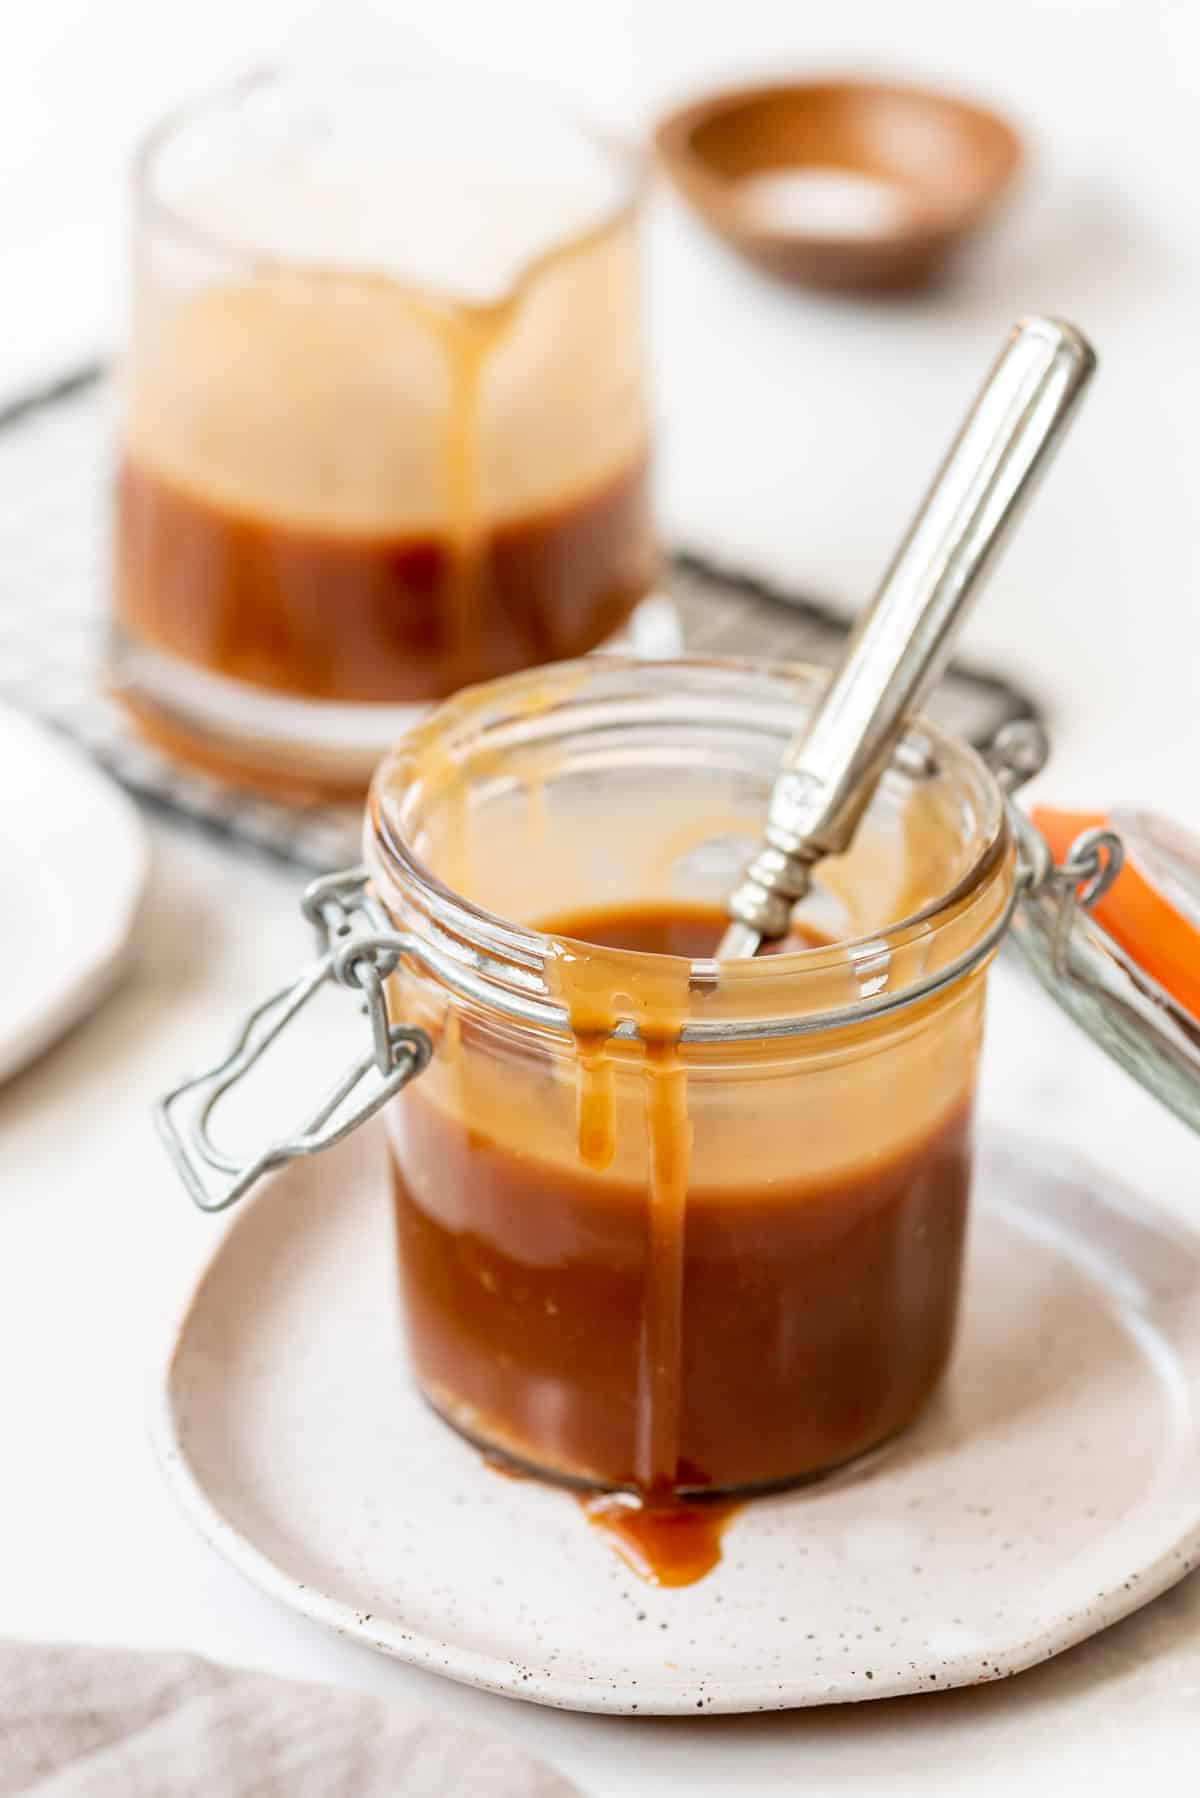 caramel sauce dripping over the side of a glass jar.